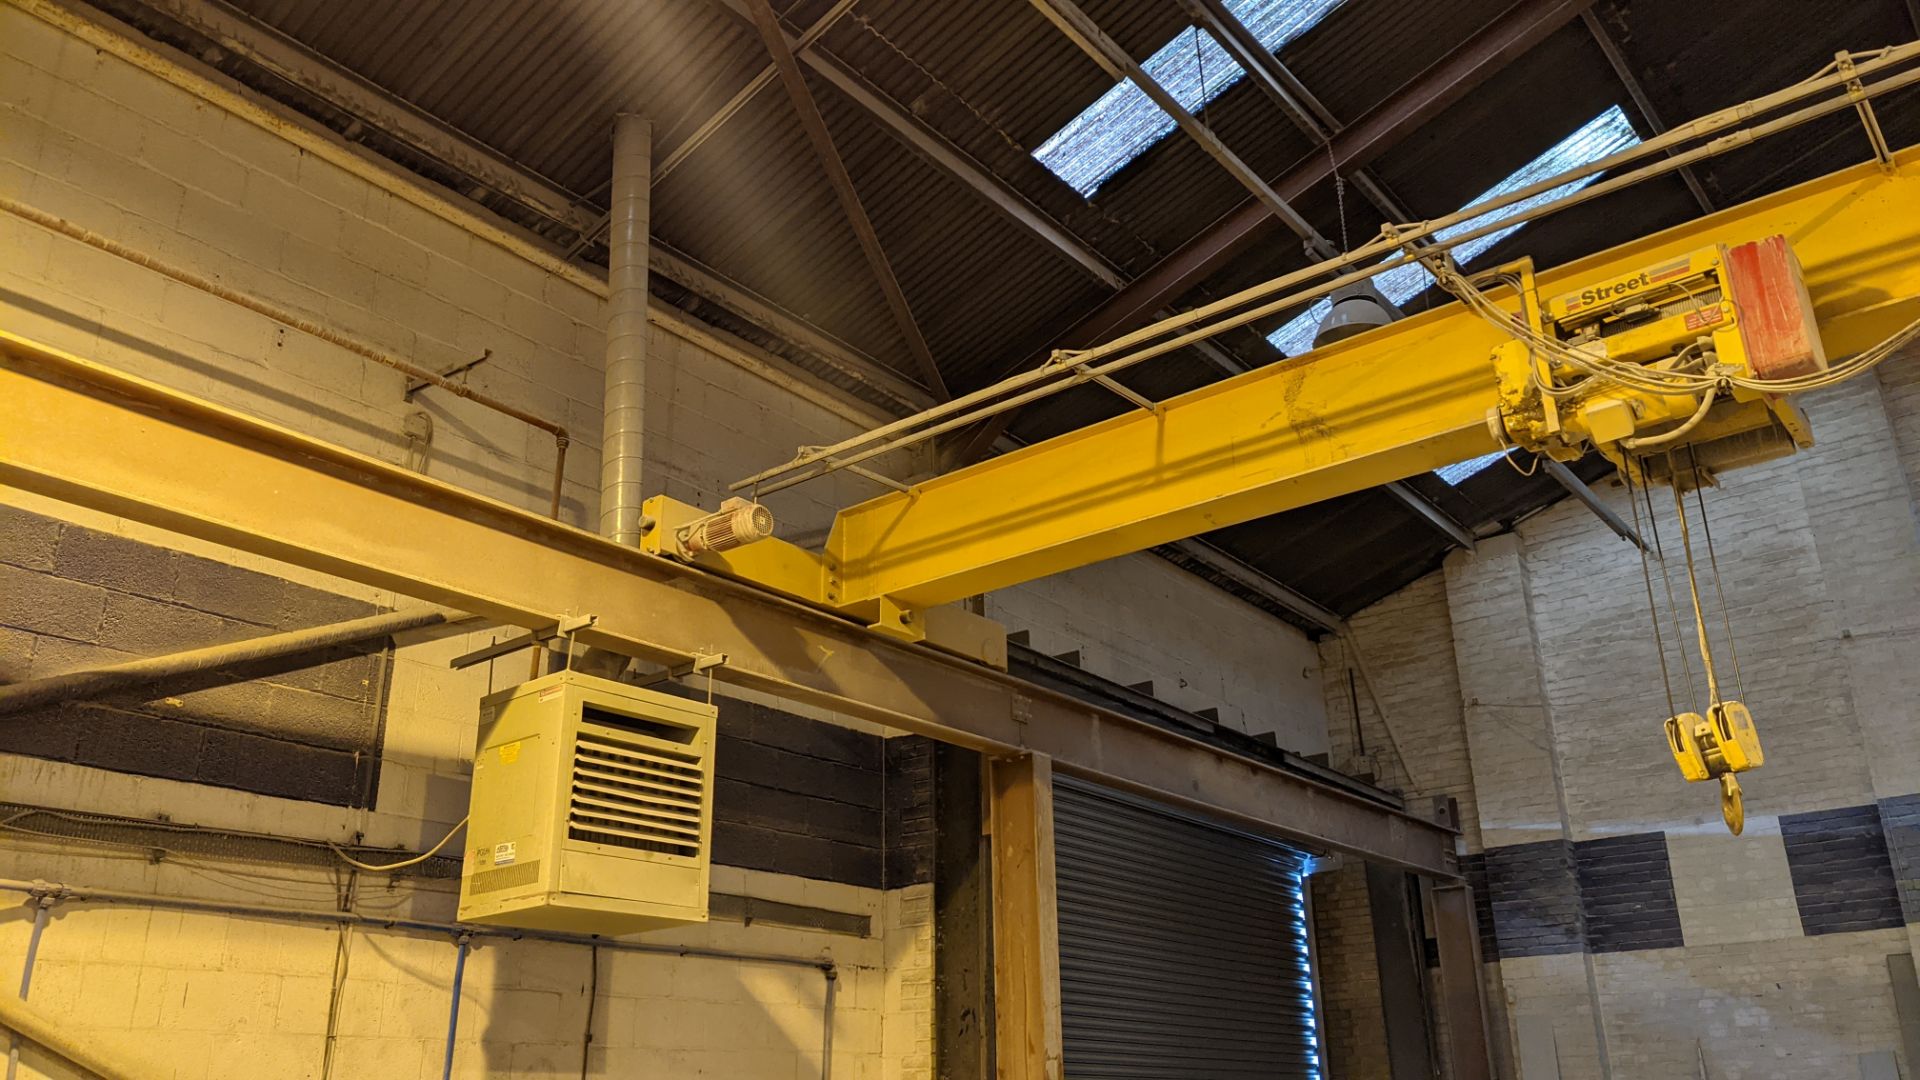 2001 Street overhead travelling crane with 3.2tonne capacity. Serial no. 11006. This lot comprises t - Image 5 of 28